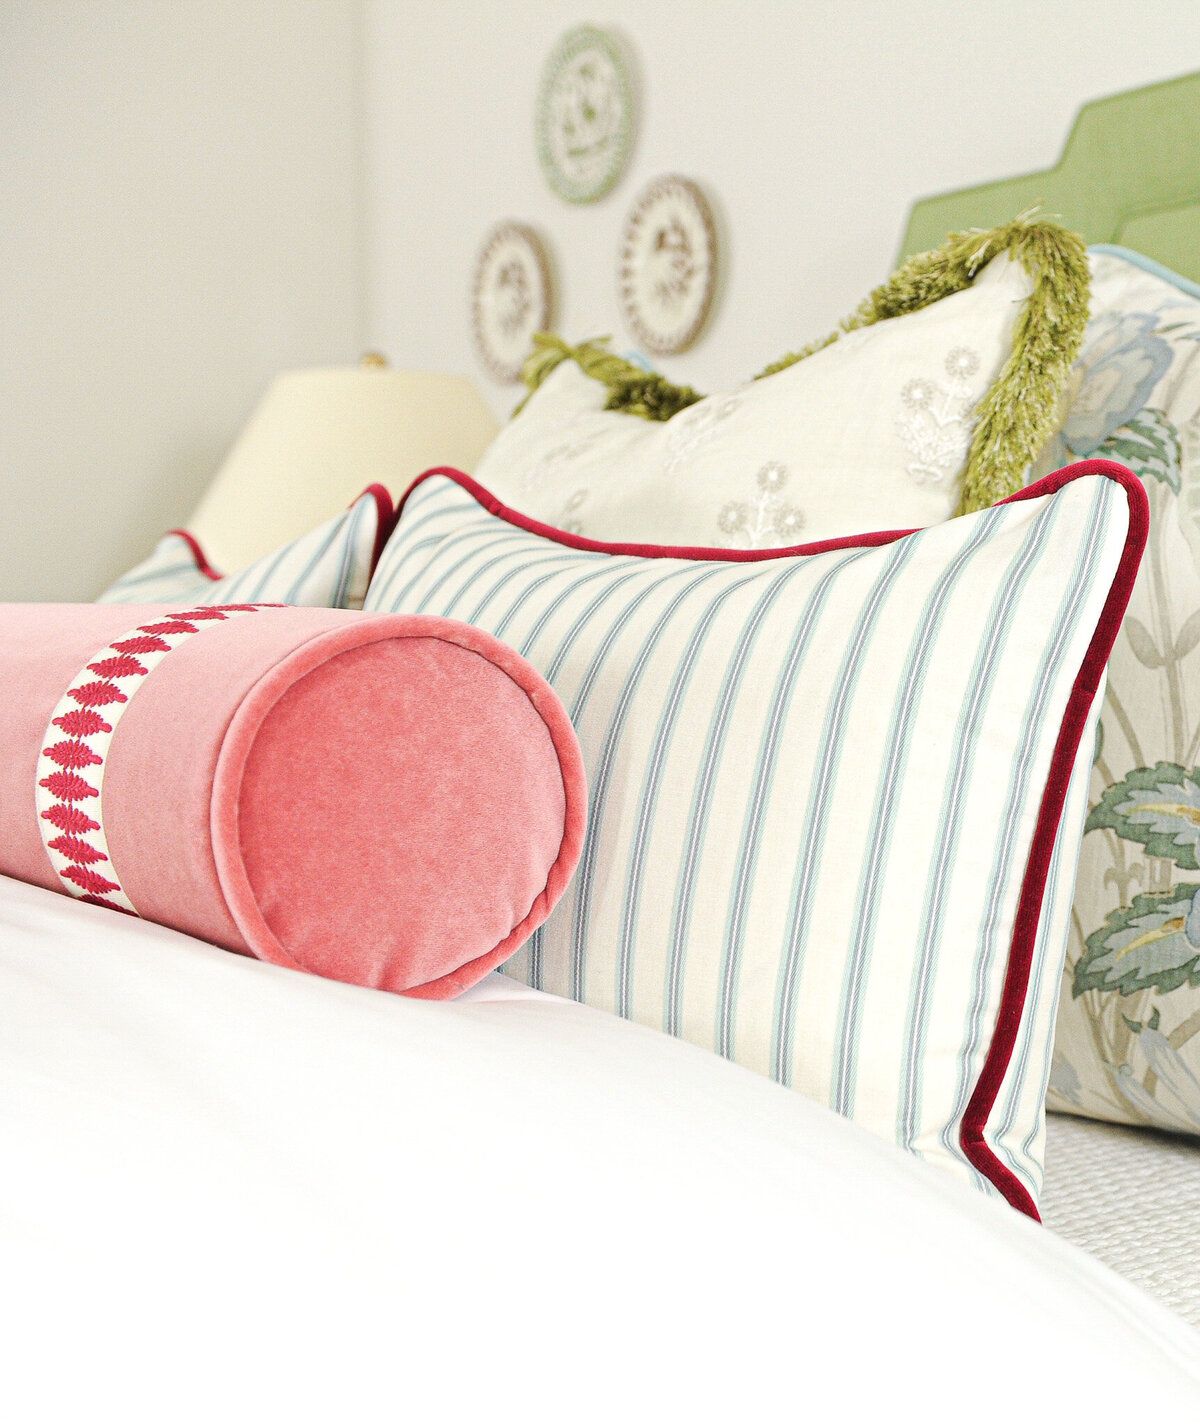 Sophisticated and tailored custom decorative pillows with velvet, striped, and patterned textiles